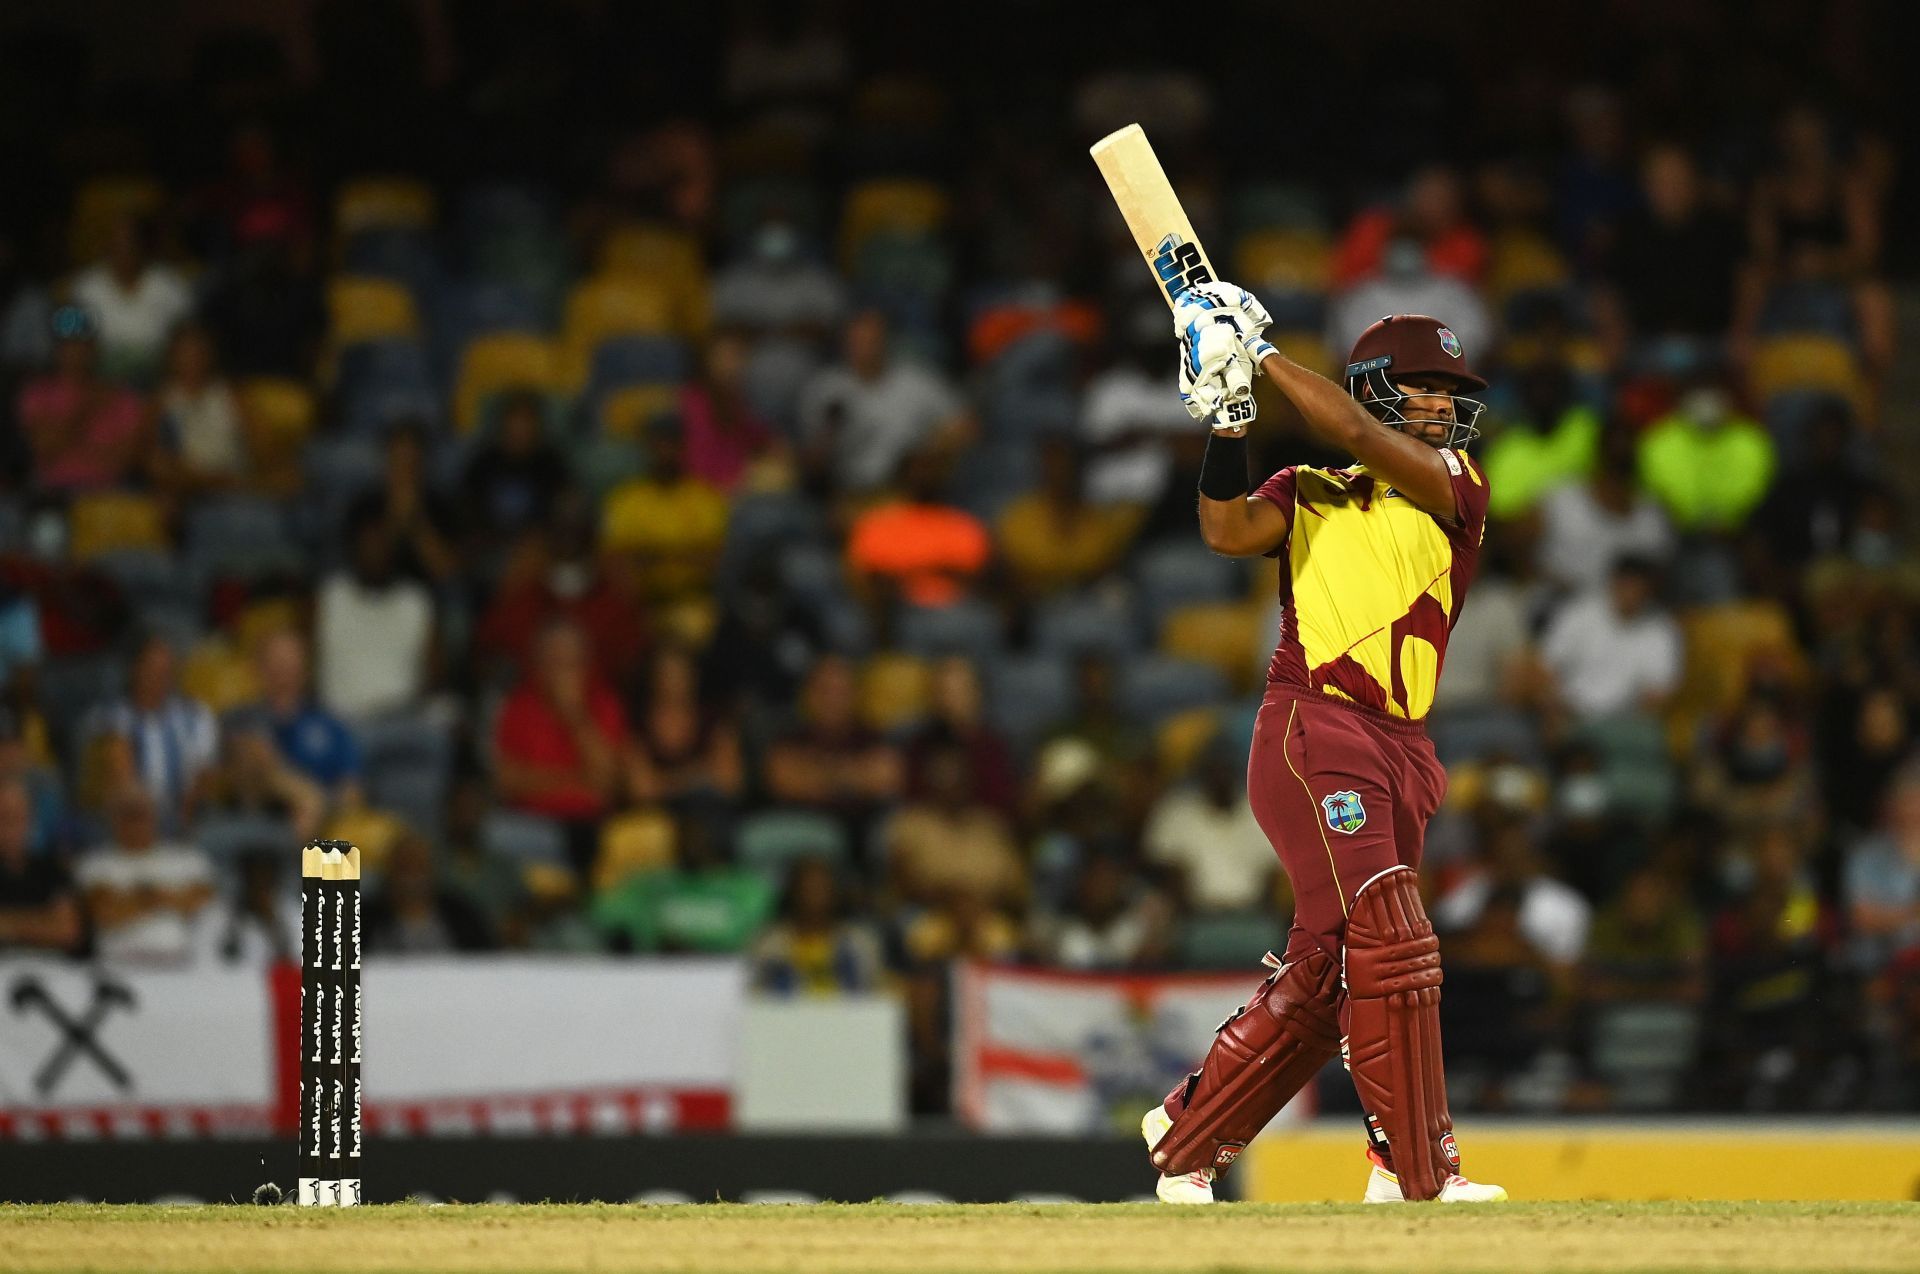 Nicholas Pooran has the ability to turn the game around in the blink of an eye